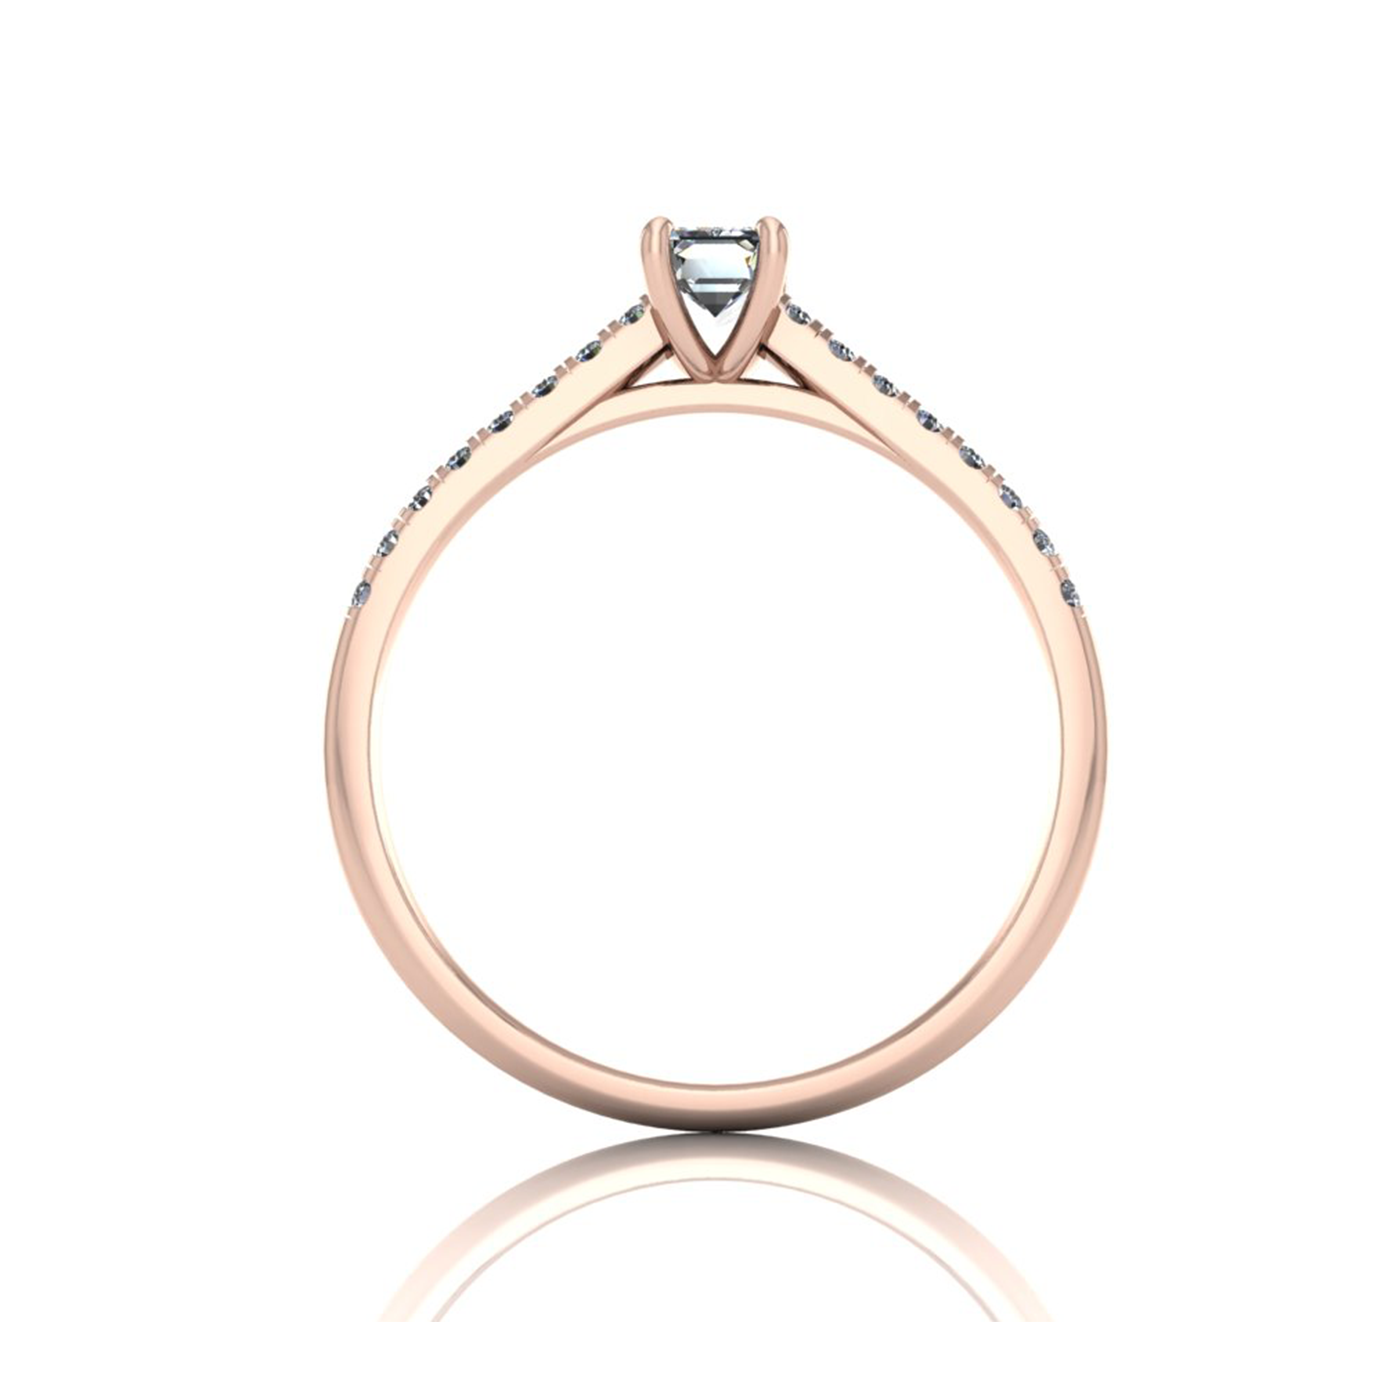 18k rose gold  0,30 ct 4 prongs emerald cut diamond engagement ring with whisper thin pavÉ set band